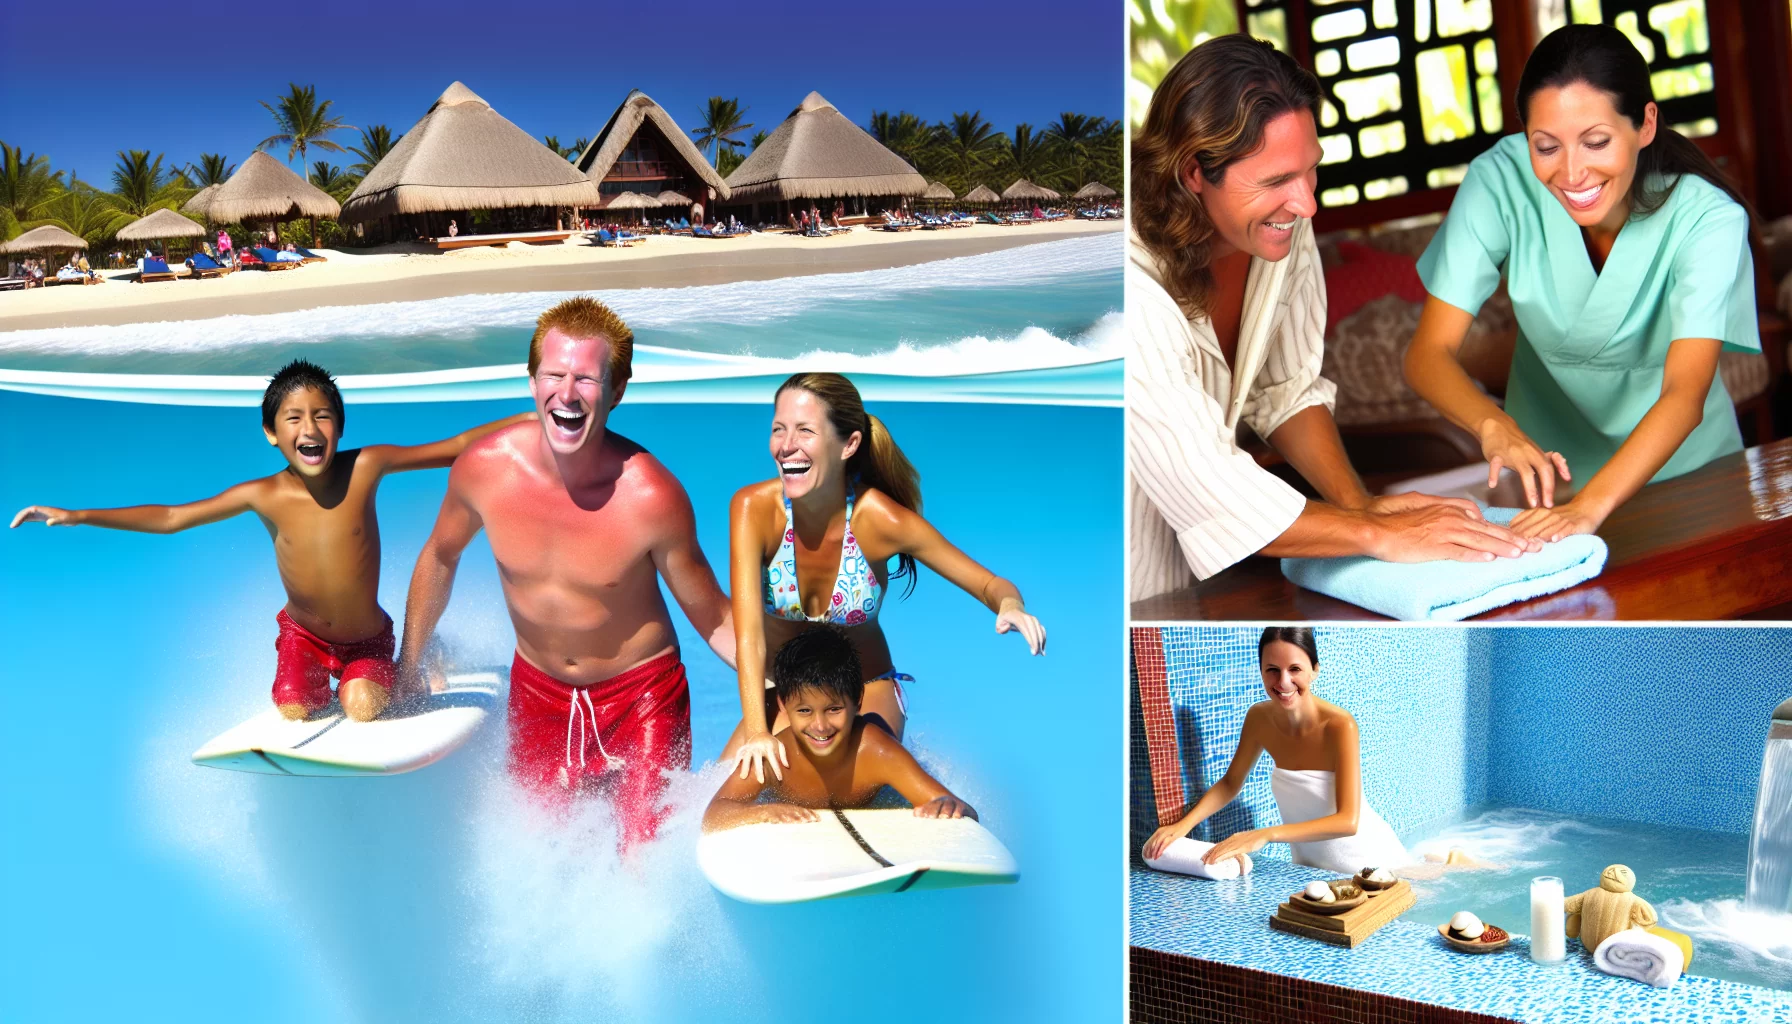 Discover unforgettable family holidays at dreams Bahia Mita Surf & Spa resort in Mexico